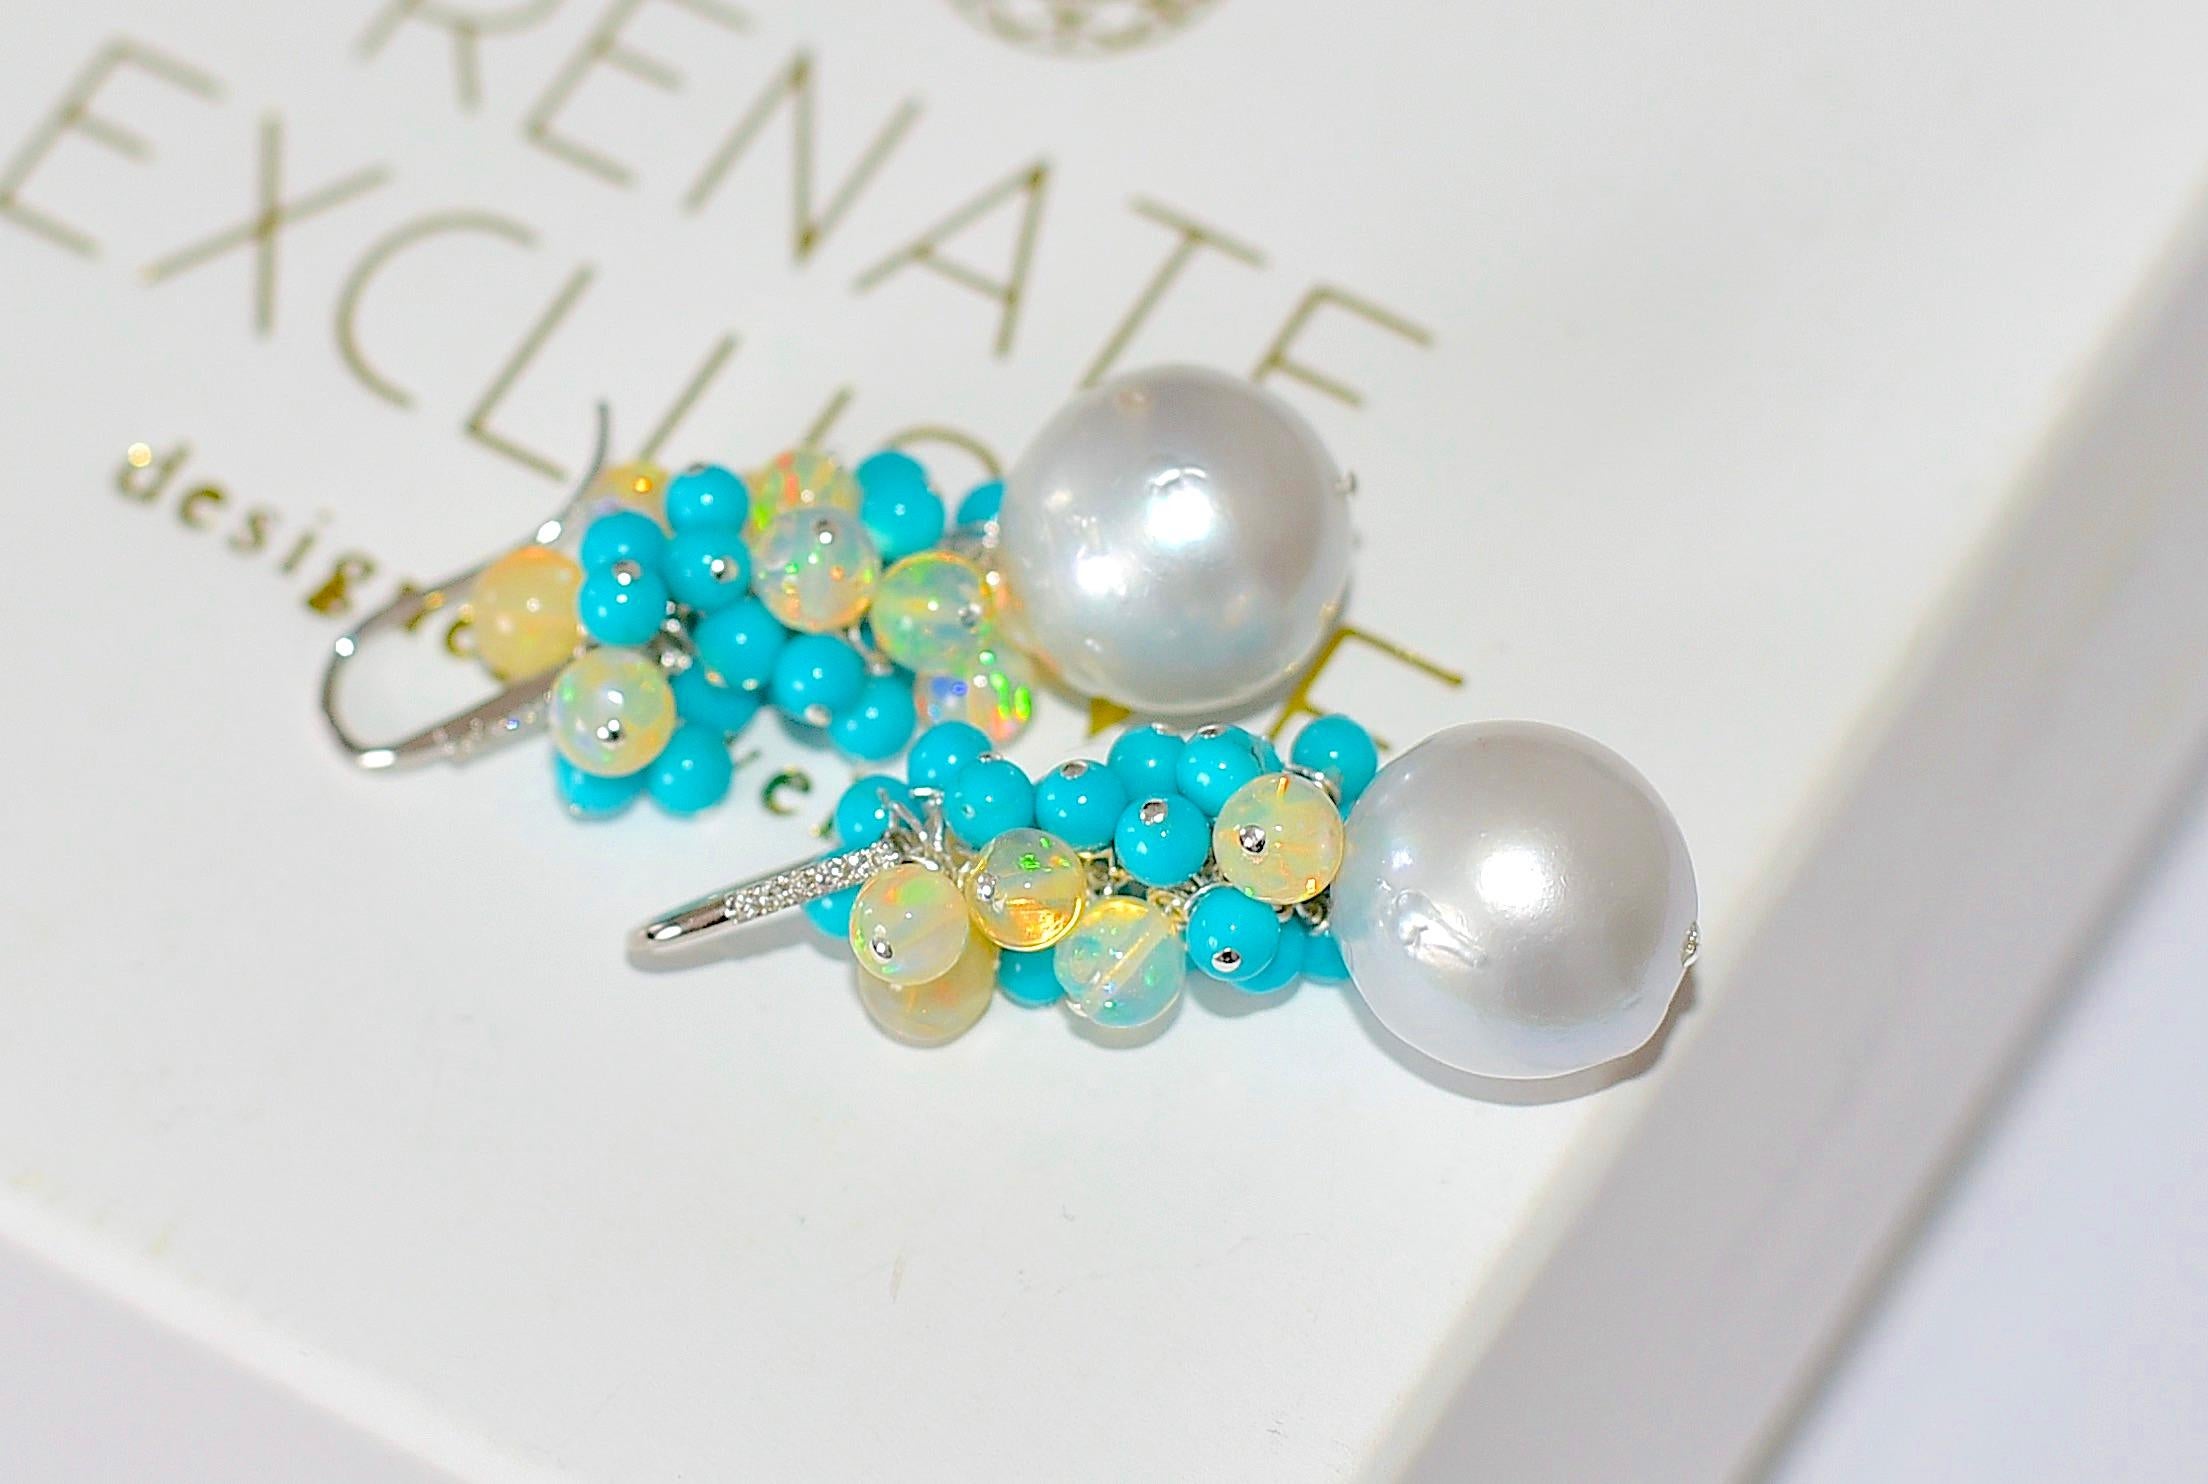 I put this popular Renate exclusive must-have earrings in Sleeping Beauty Turquoise, Ethiopian Crystal Opal, and South Sea Baroque Pearl materials. Outstanding enough to make you jealous! Opal is bright and turquoise adds summer elegance. The total